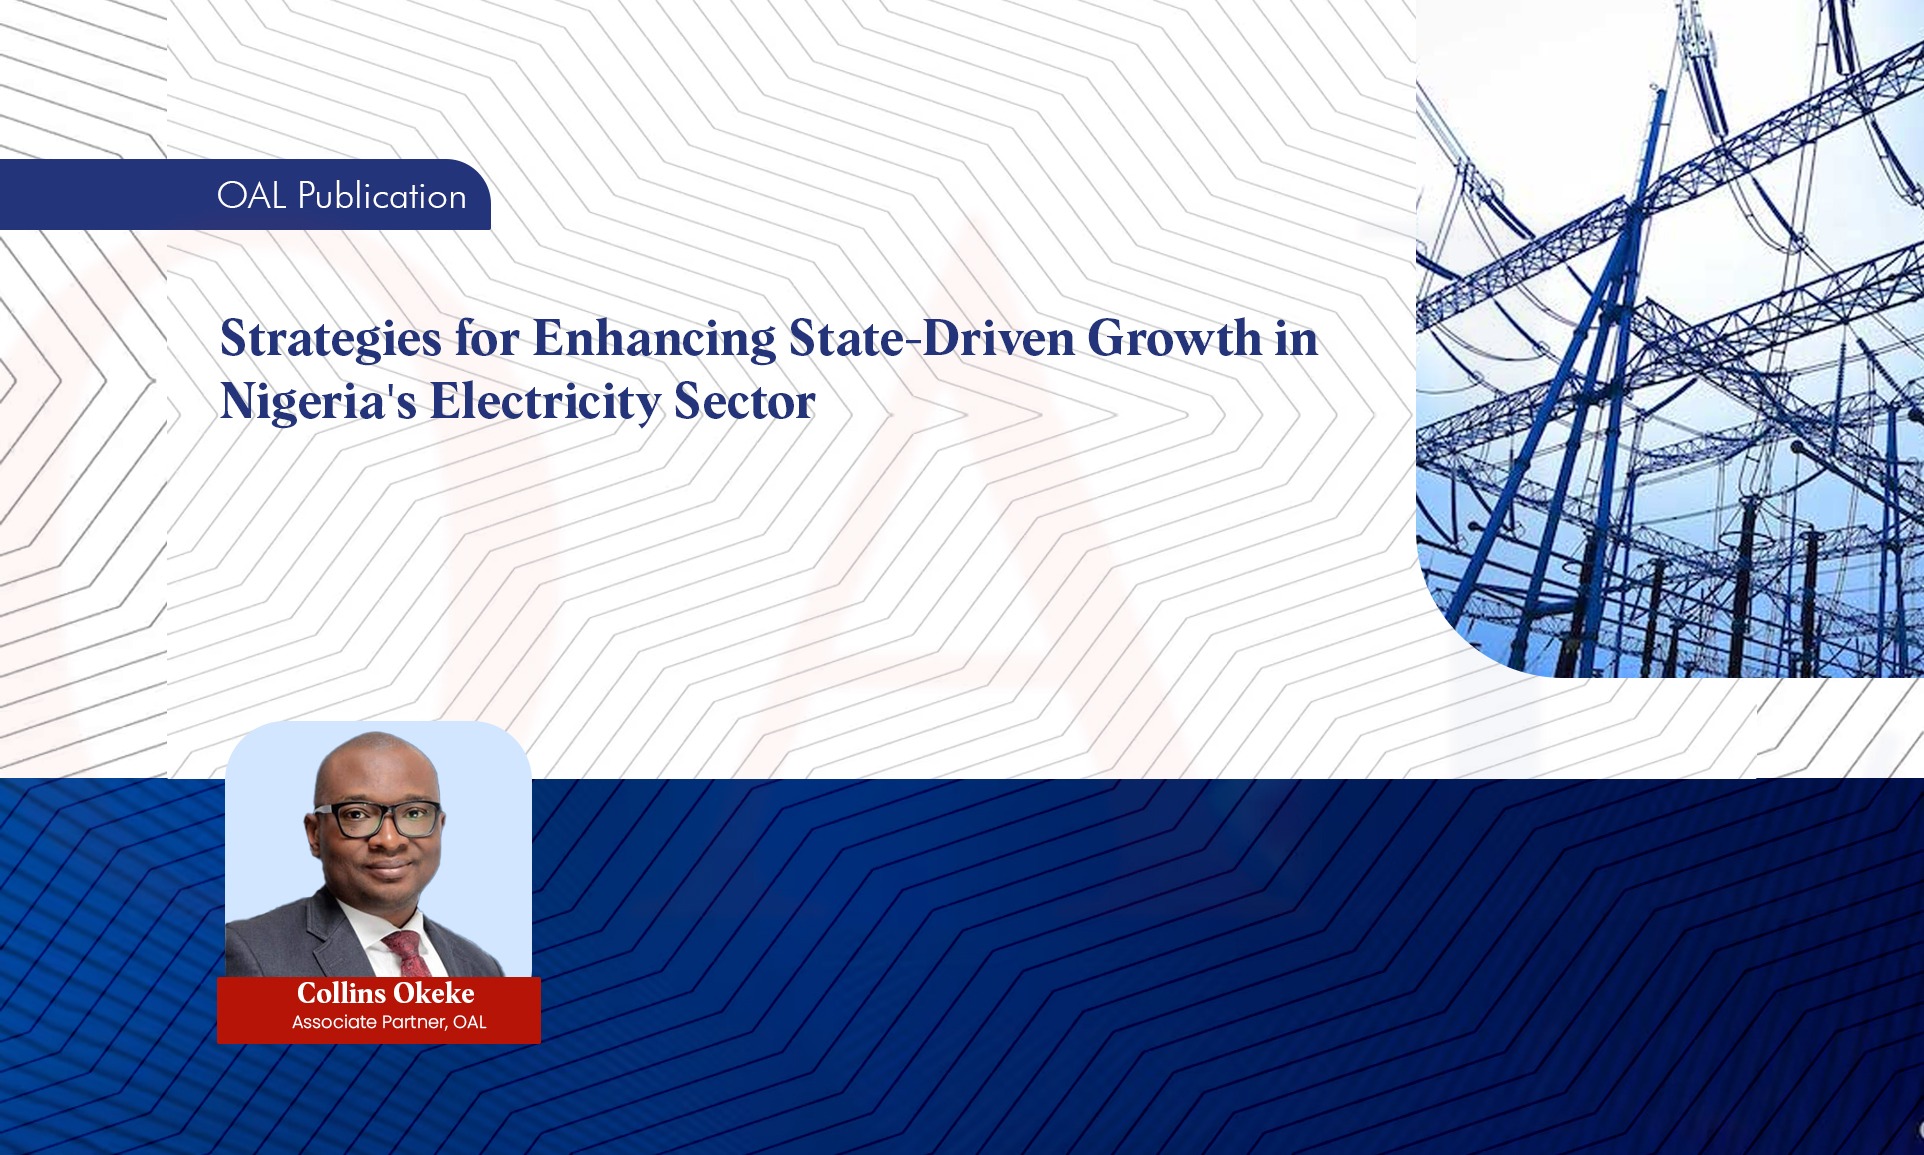 Strategies for Enhancing State-Driven Growth in Nigeria's Electricity Sector